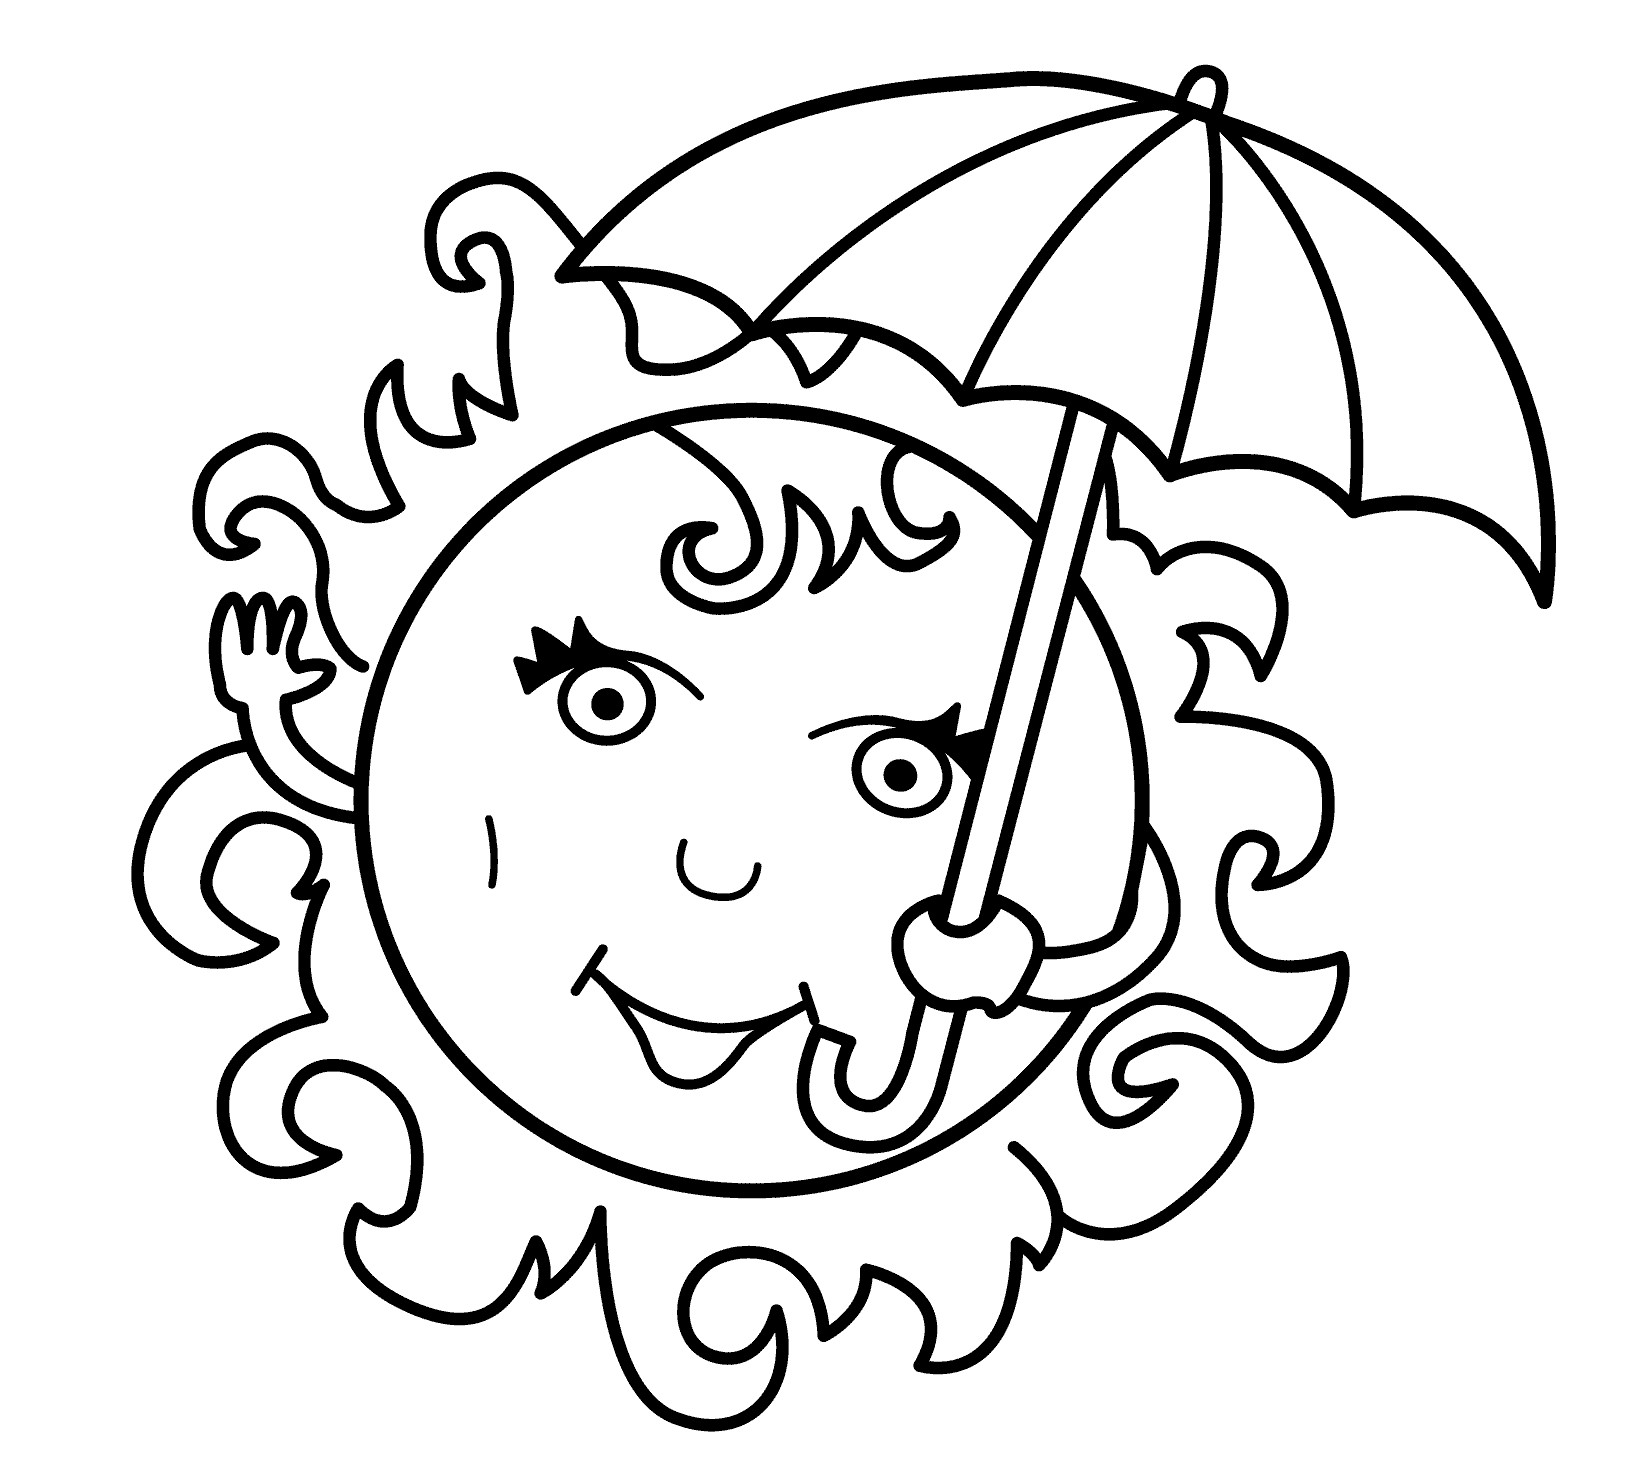 Summer Coloring Pages For Kids
 Download Free Printable Summer Coloring Pages for Kids